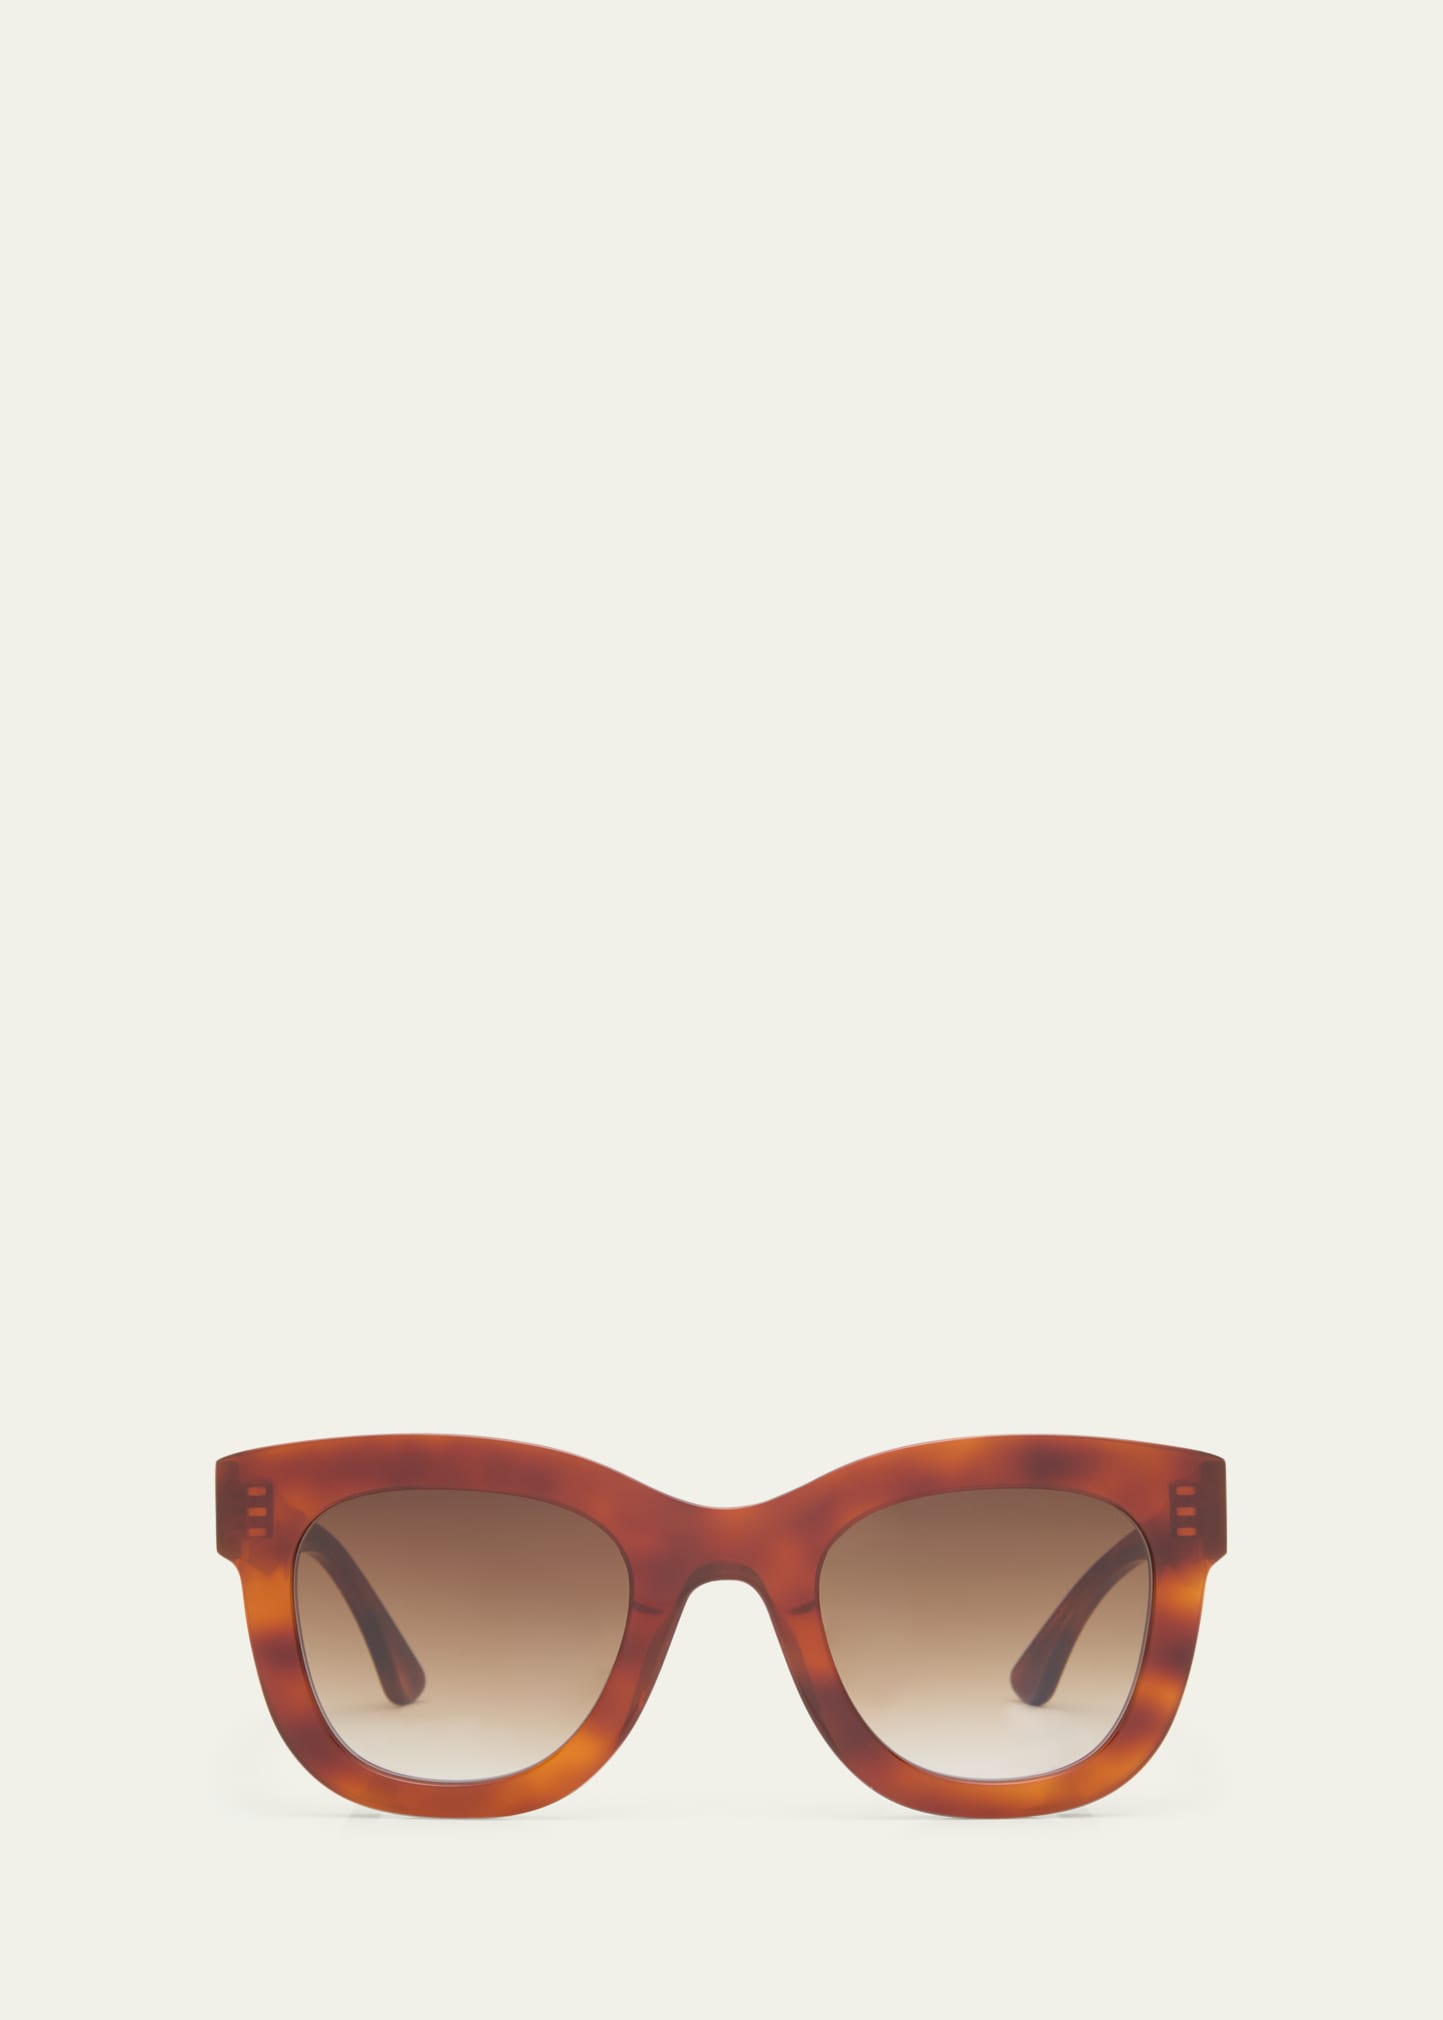 Thierry Lasry Gambly 053 Acetate Cat-eye Sunglasses In Camel/smk